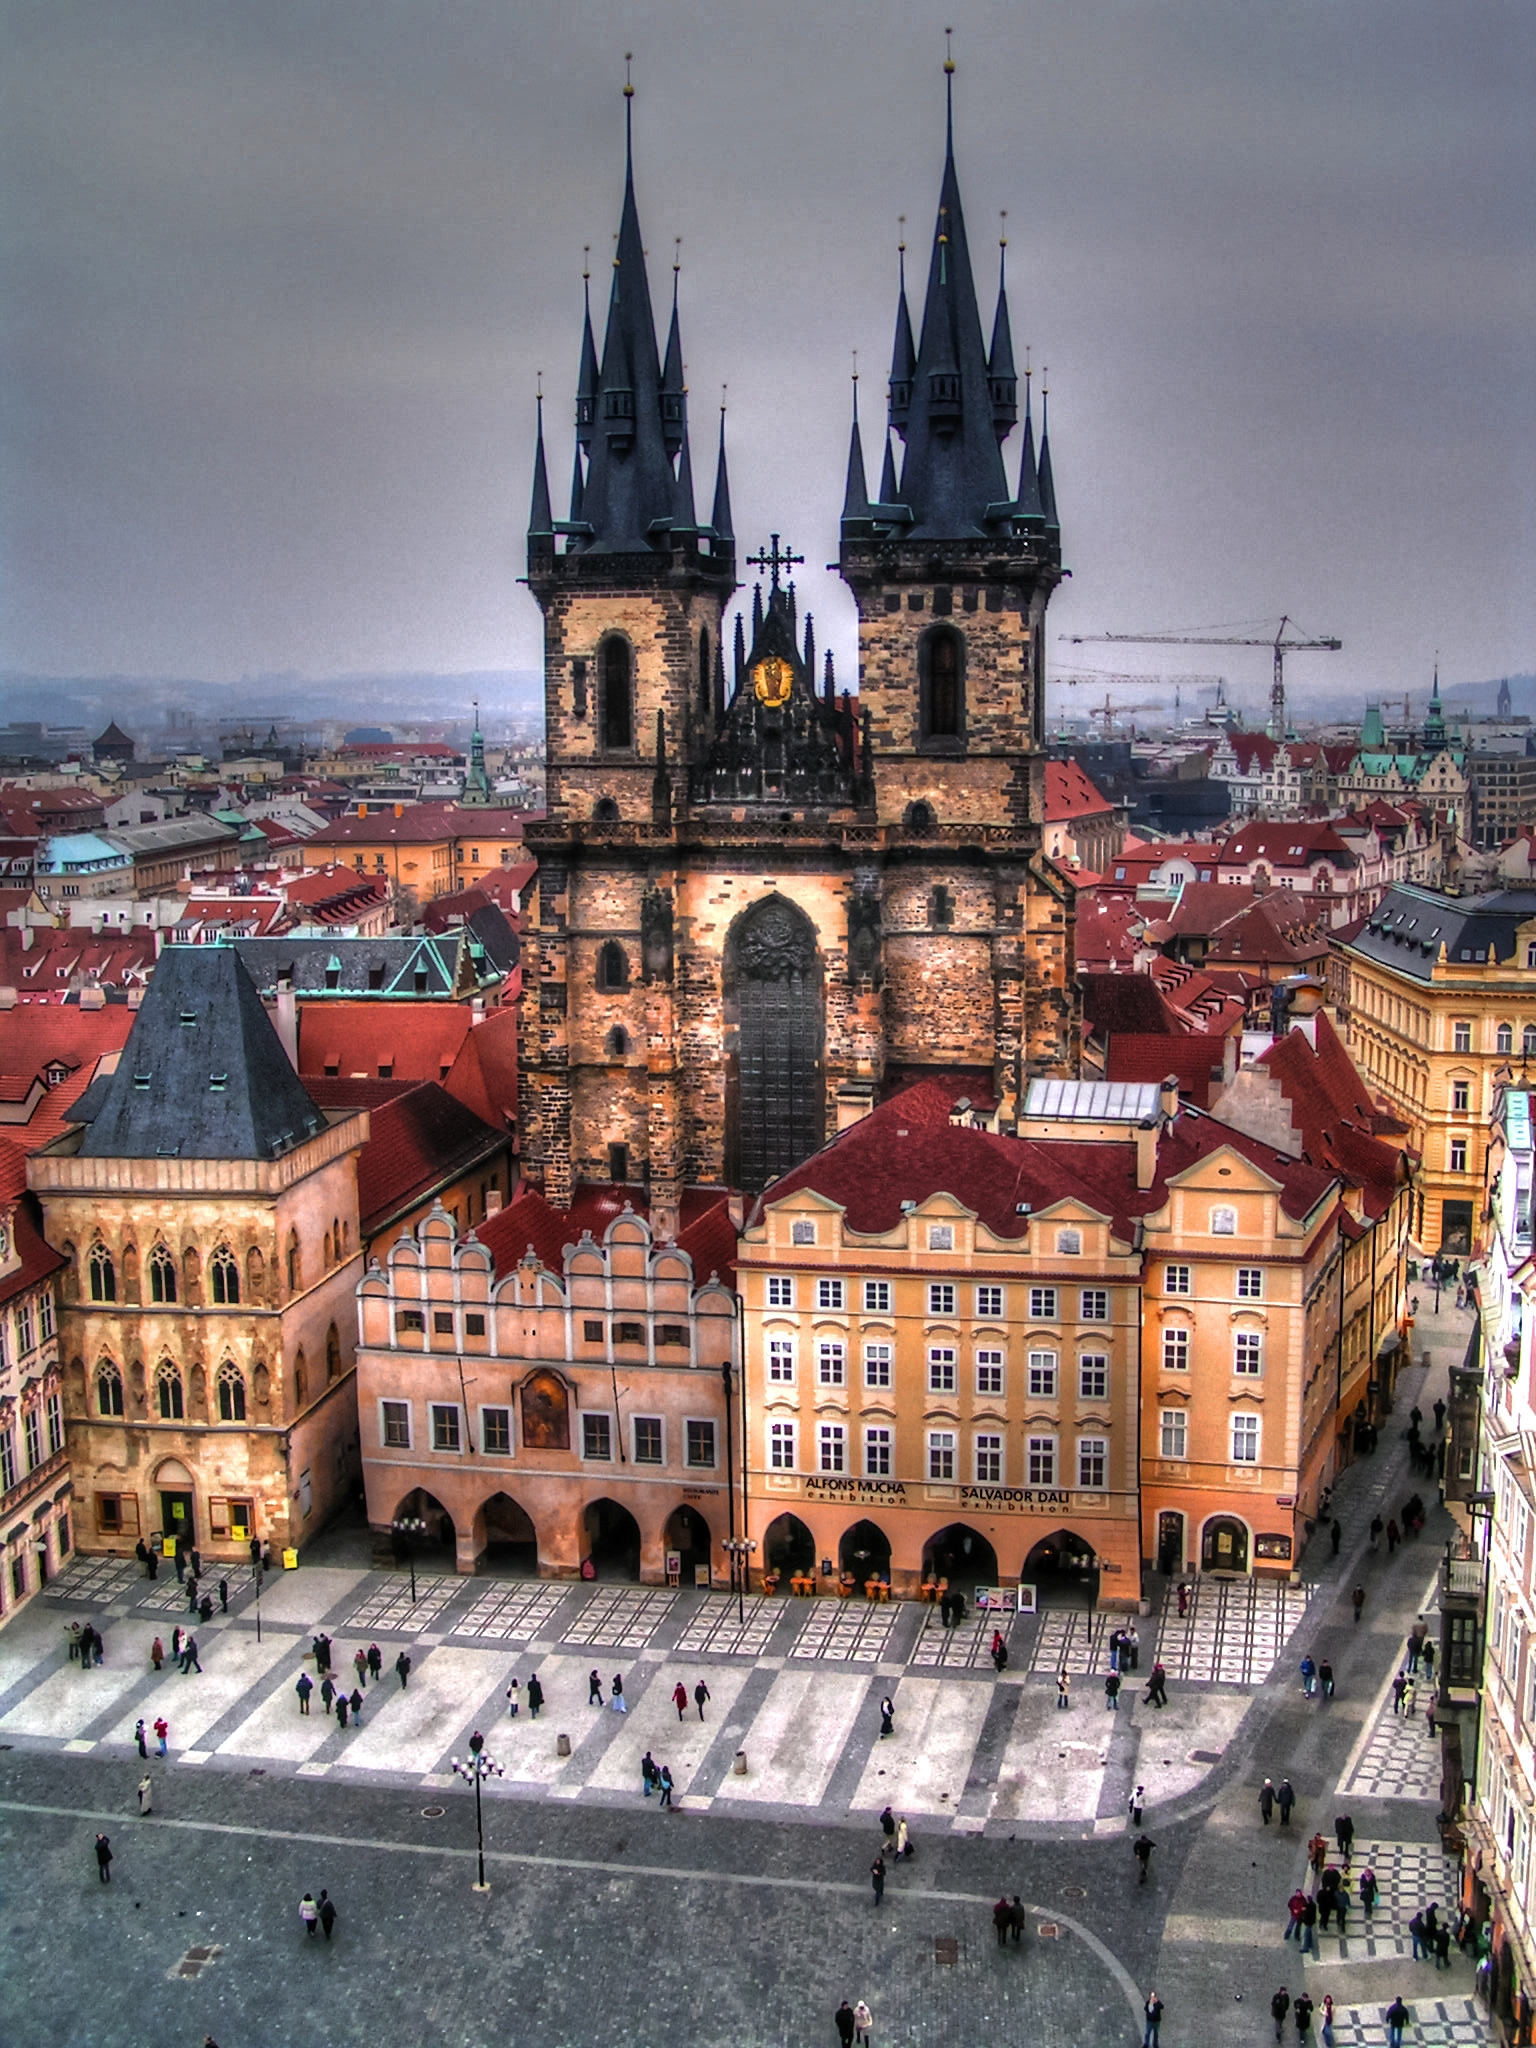 a large old church with many spires sits in the city